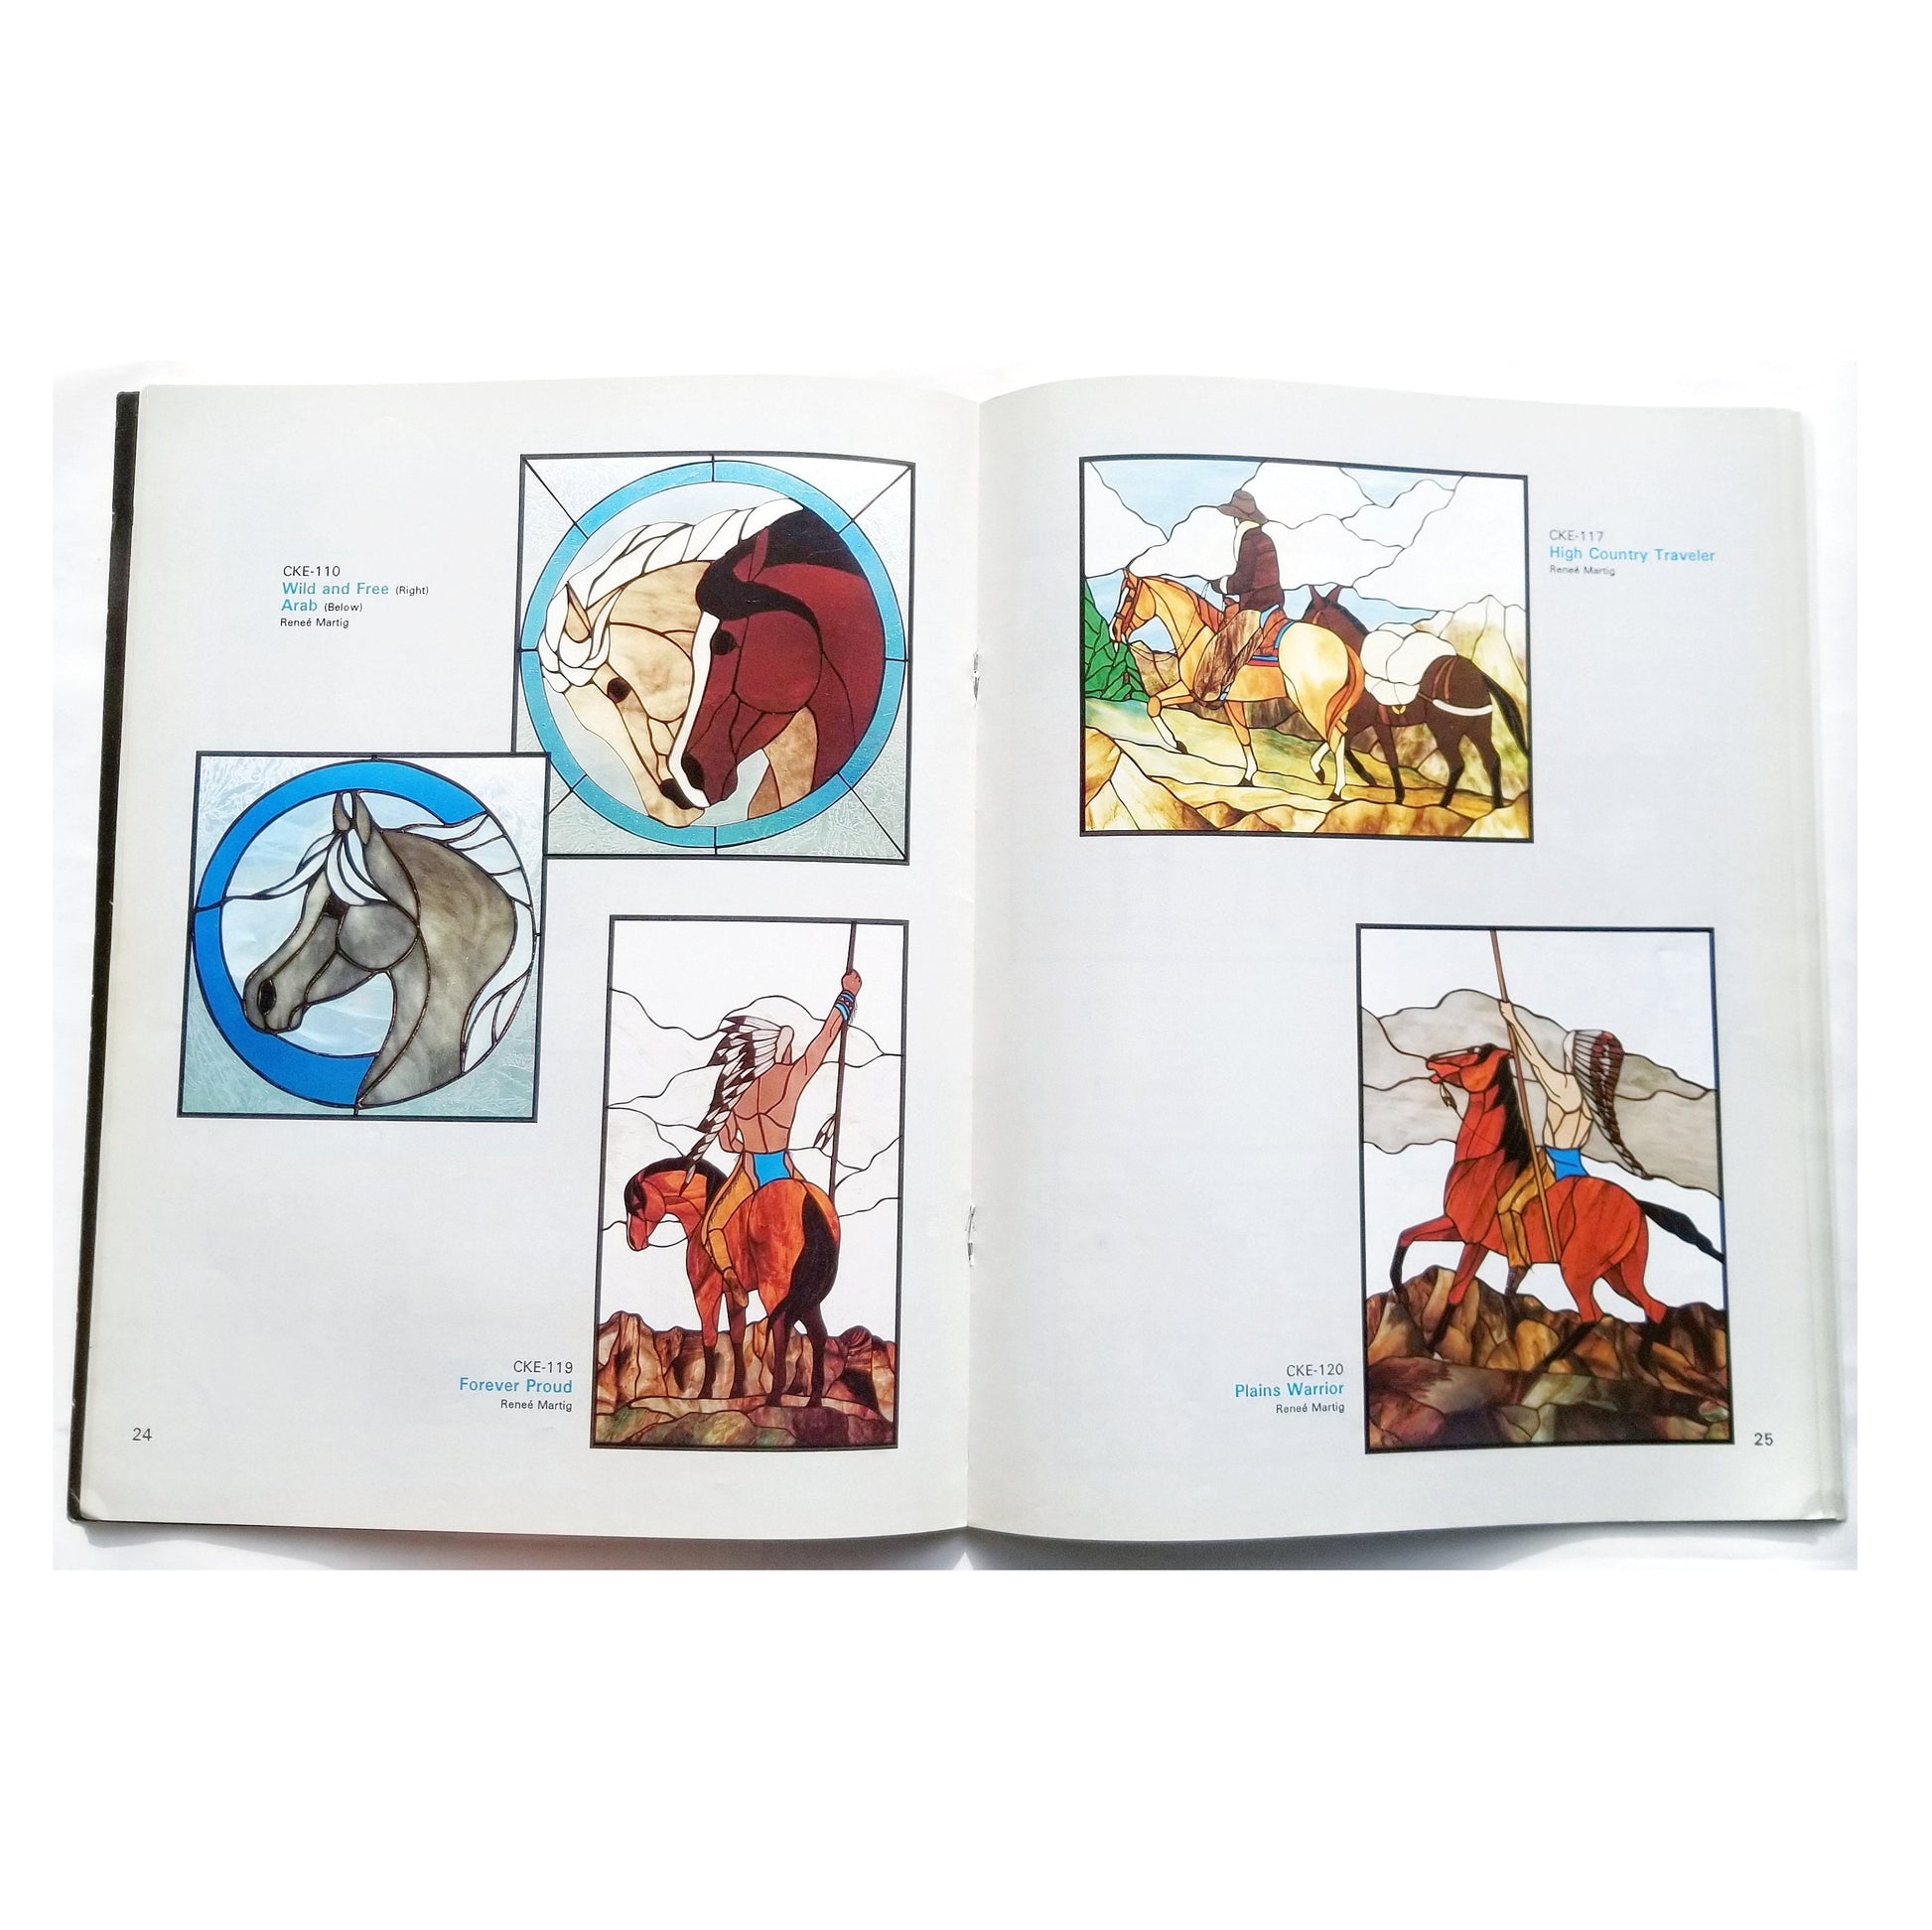 Stained Glass Design Book. Glass Patterns in Color 2. Wide variety of subjects, horses, rose, spaceship & car. Publisher, Carolyn Kyle.